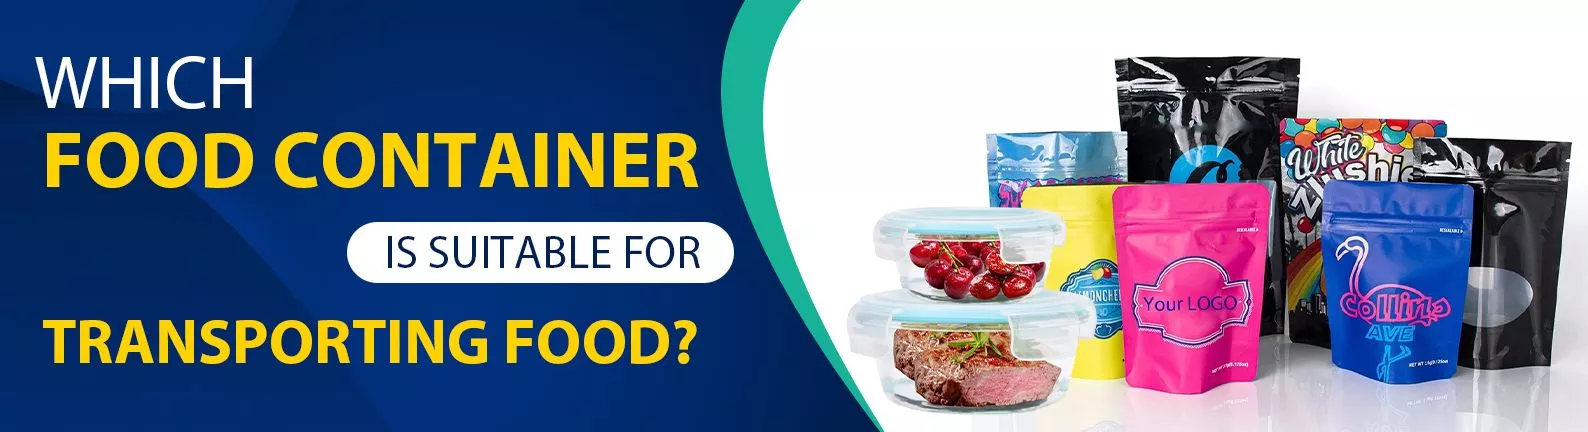 Which-Food-Container-Is-Suitable-For-Transporting-Food